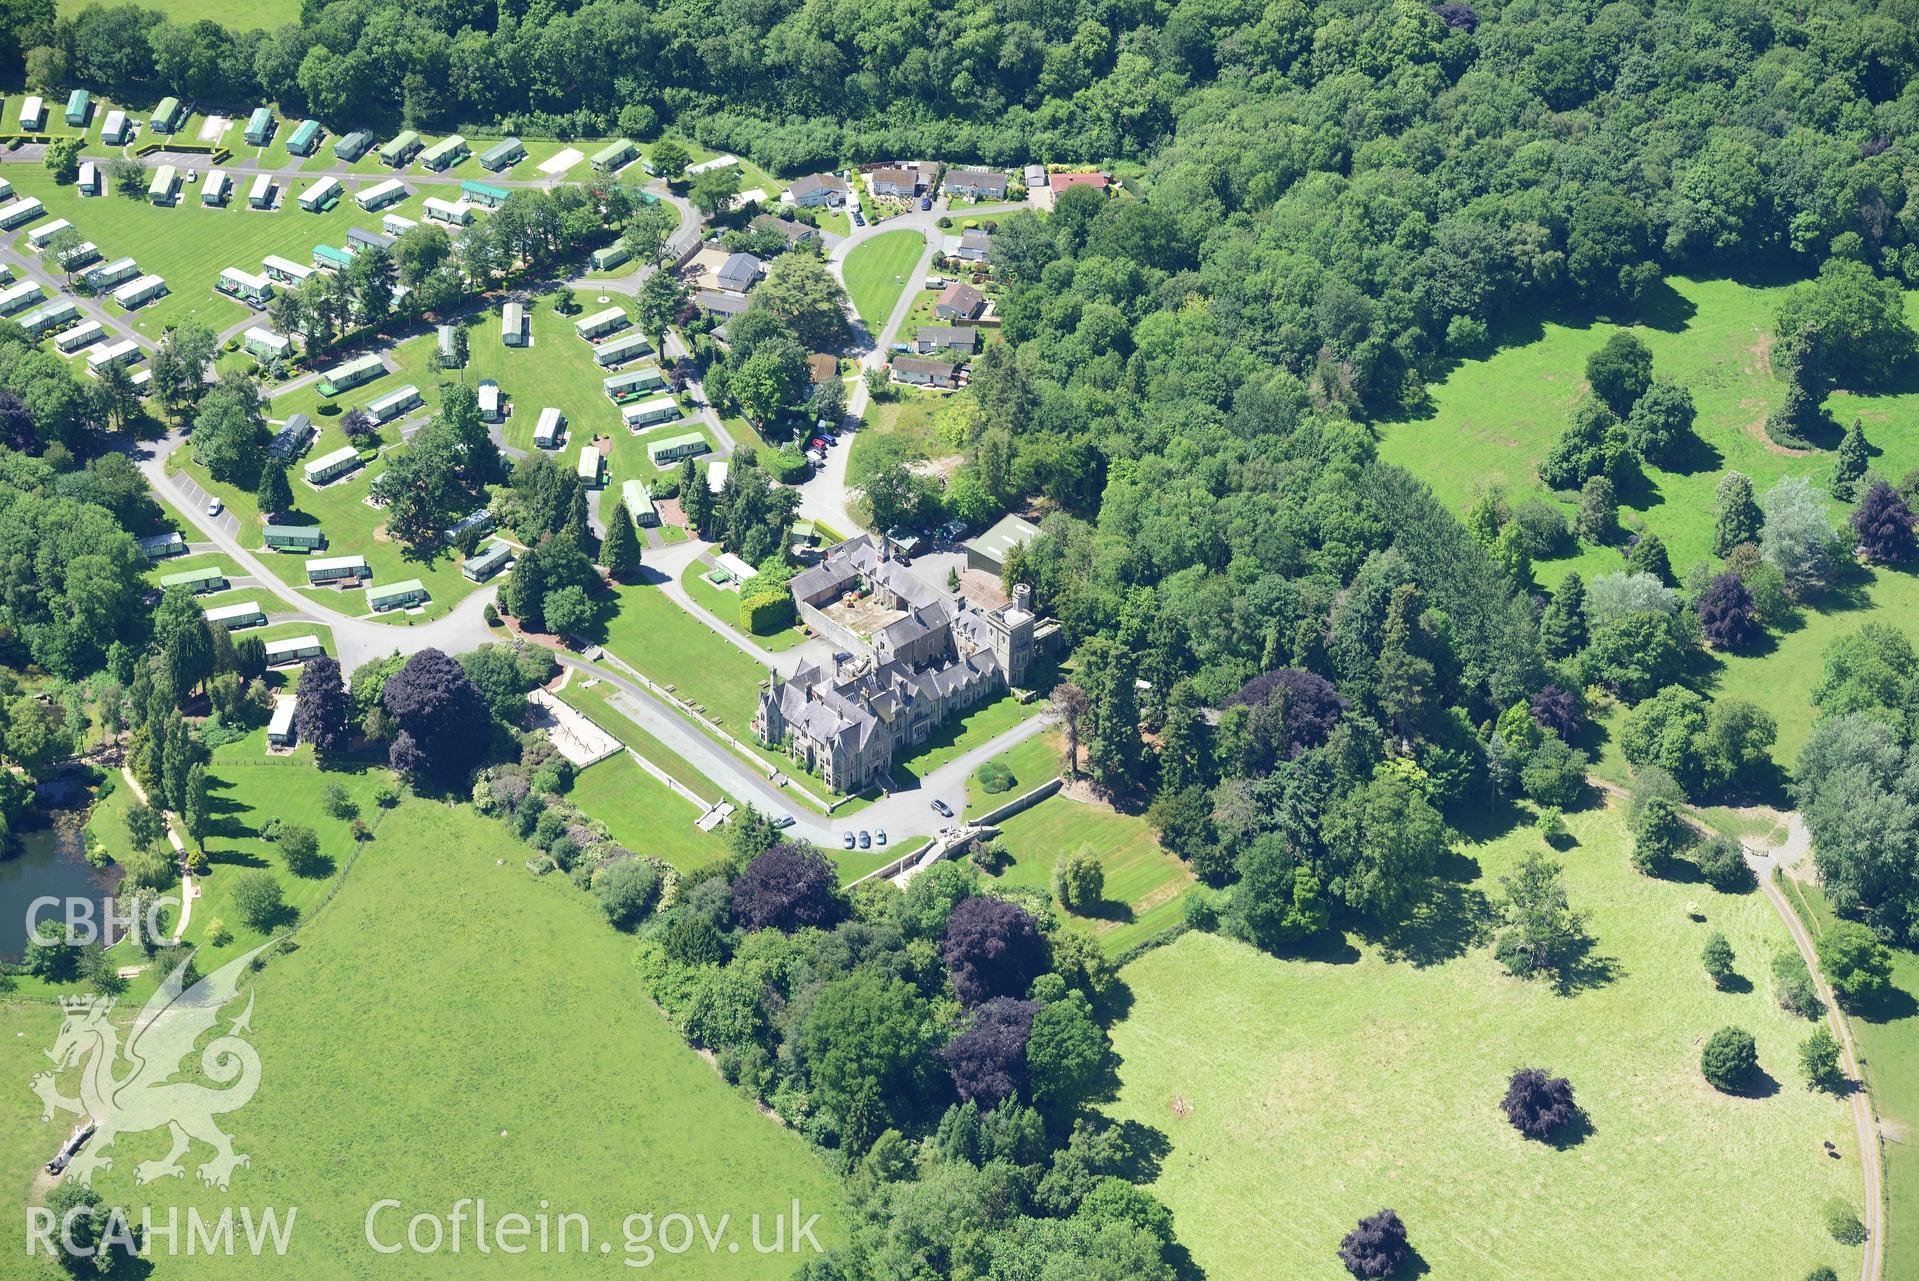 Mellington Hall, it's garden and the section of Offa's Dyke that runs through its grounds. Oblique aerial photograph taken during the Royal Commission's programme of archaeological aerial reconnaissance by Toby Driver on 30th June 2015.